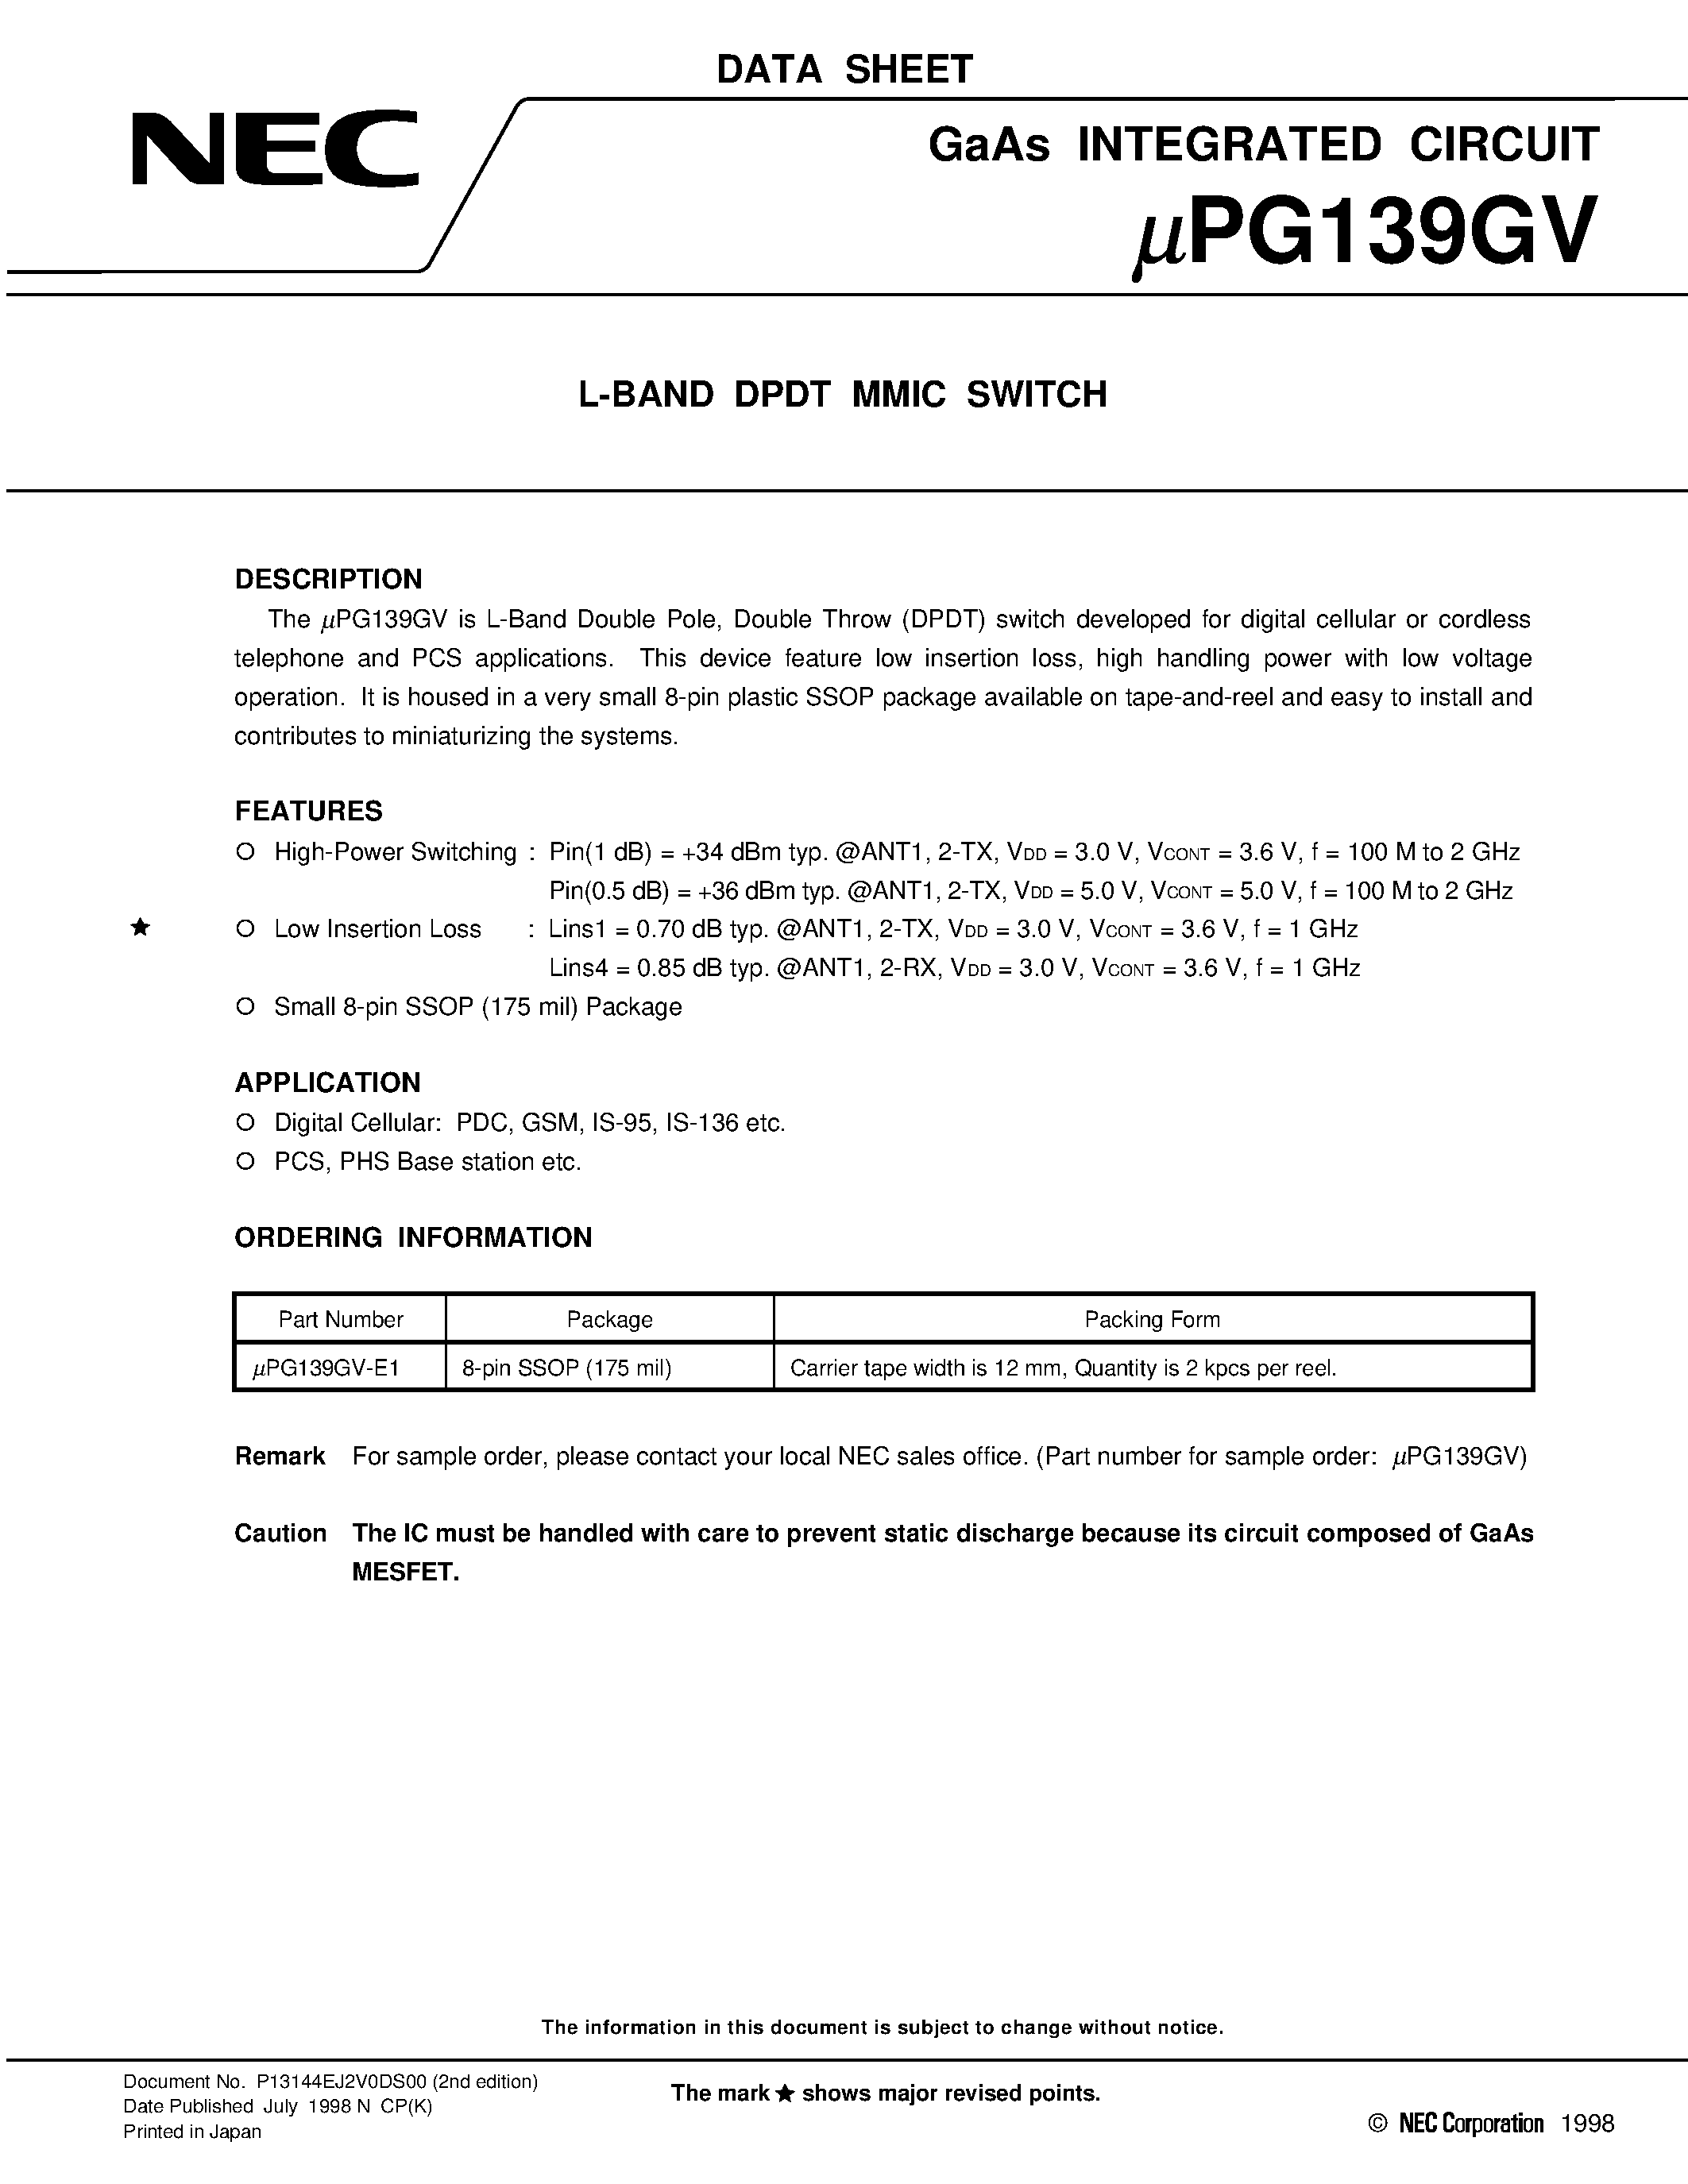 Datasheet UPG139GV-E1 - L-BAND DPDT MMIC SWITCH page 1